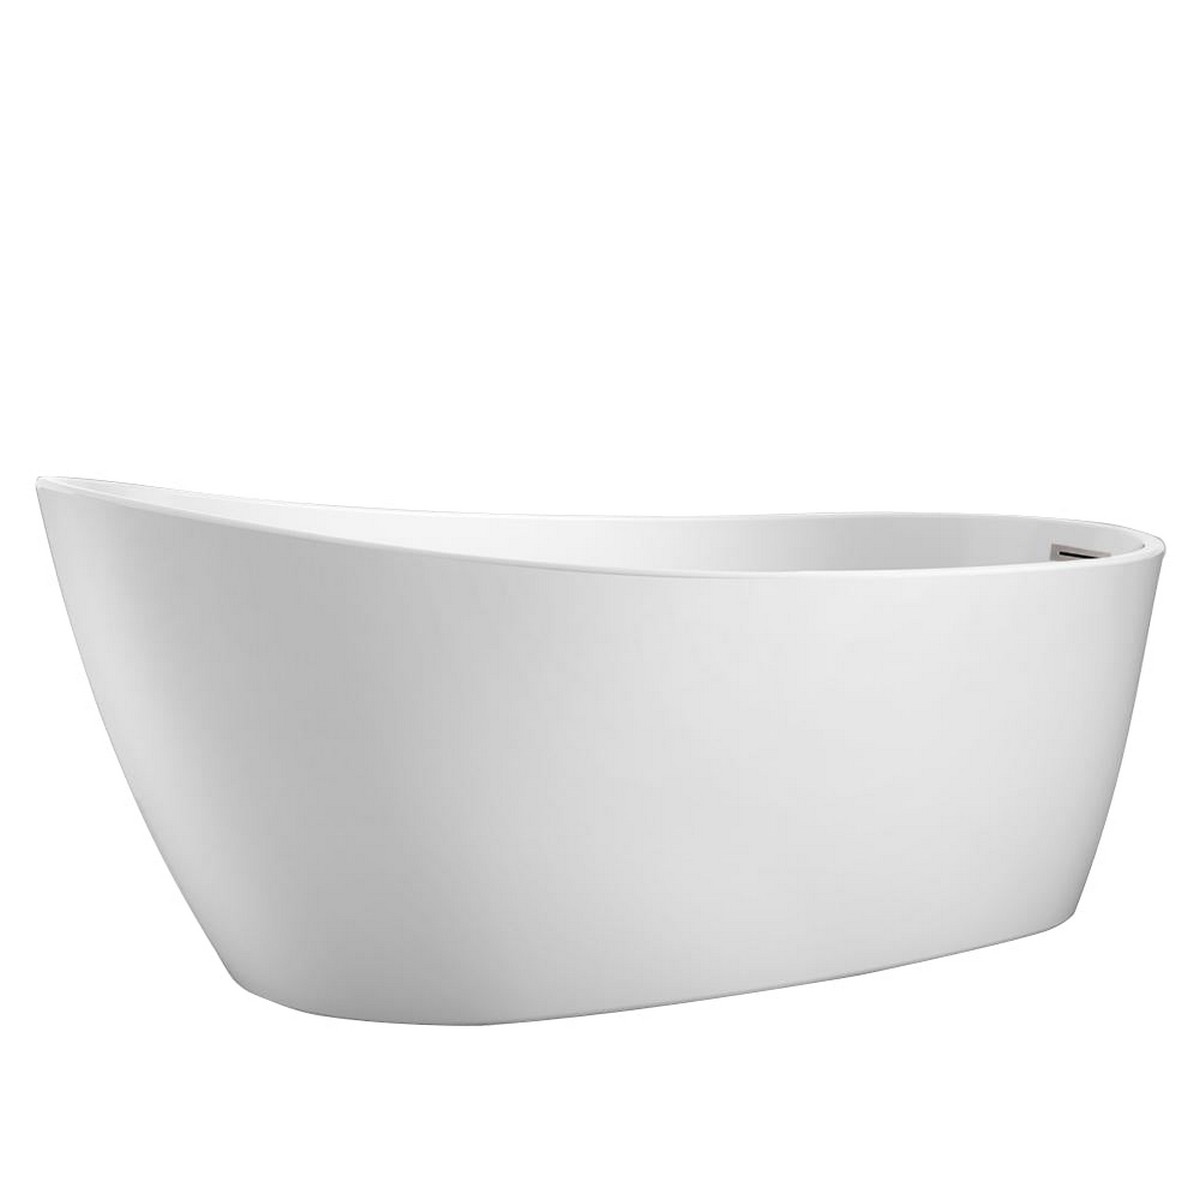 BARCLAY ATSN60FIG LORENZO 60 INCH ACRYLIC FREESTANDING OVAL SOAKING SLIPPER BATHTUB IN WHITE WITH INTEGRAL DRAIN AND OVERFLOW